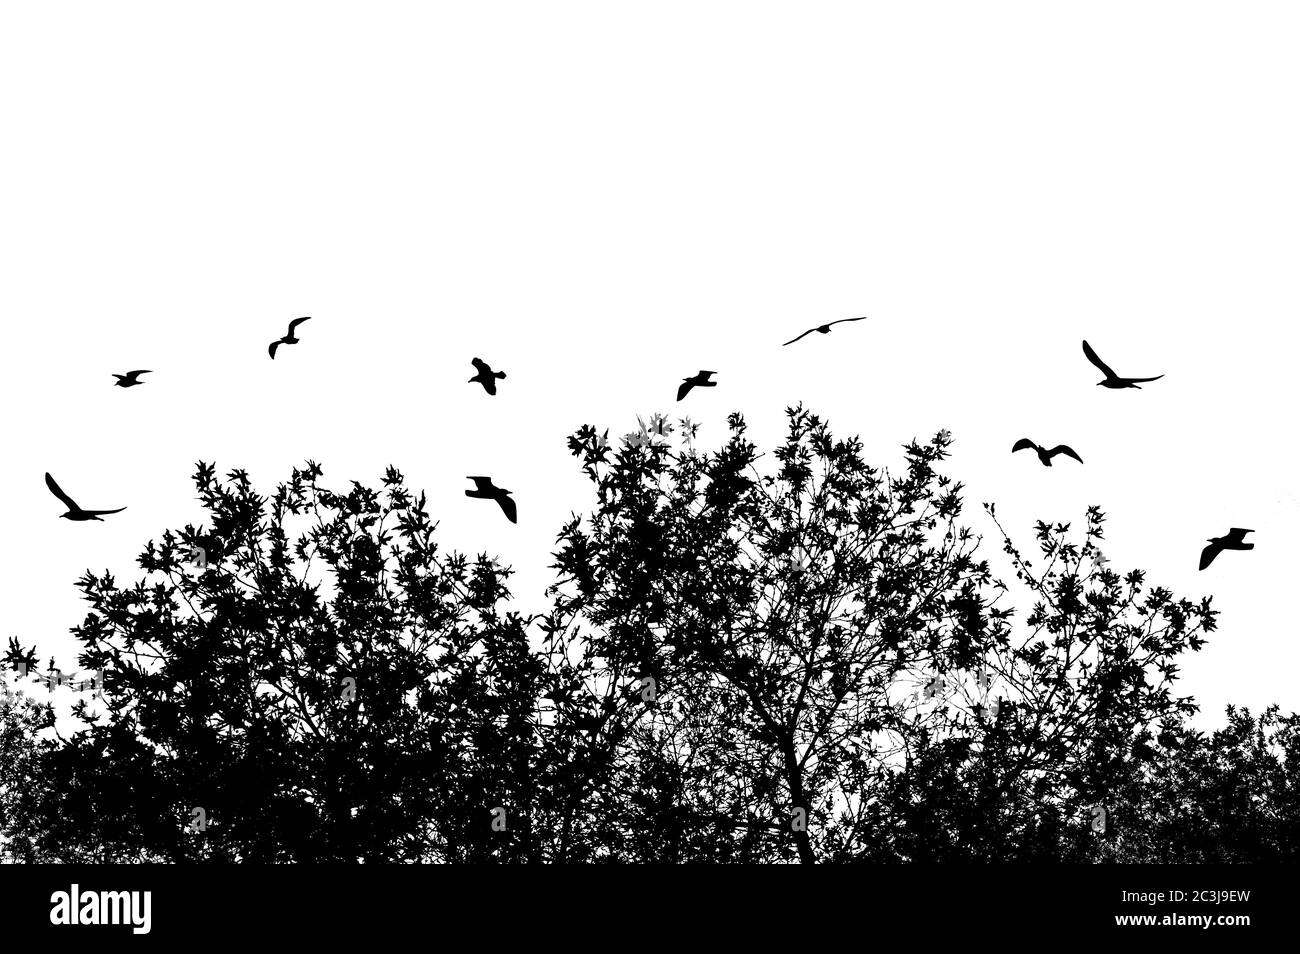 Silhouettes of tree and branches with flying birds on a white background Stock Photo